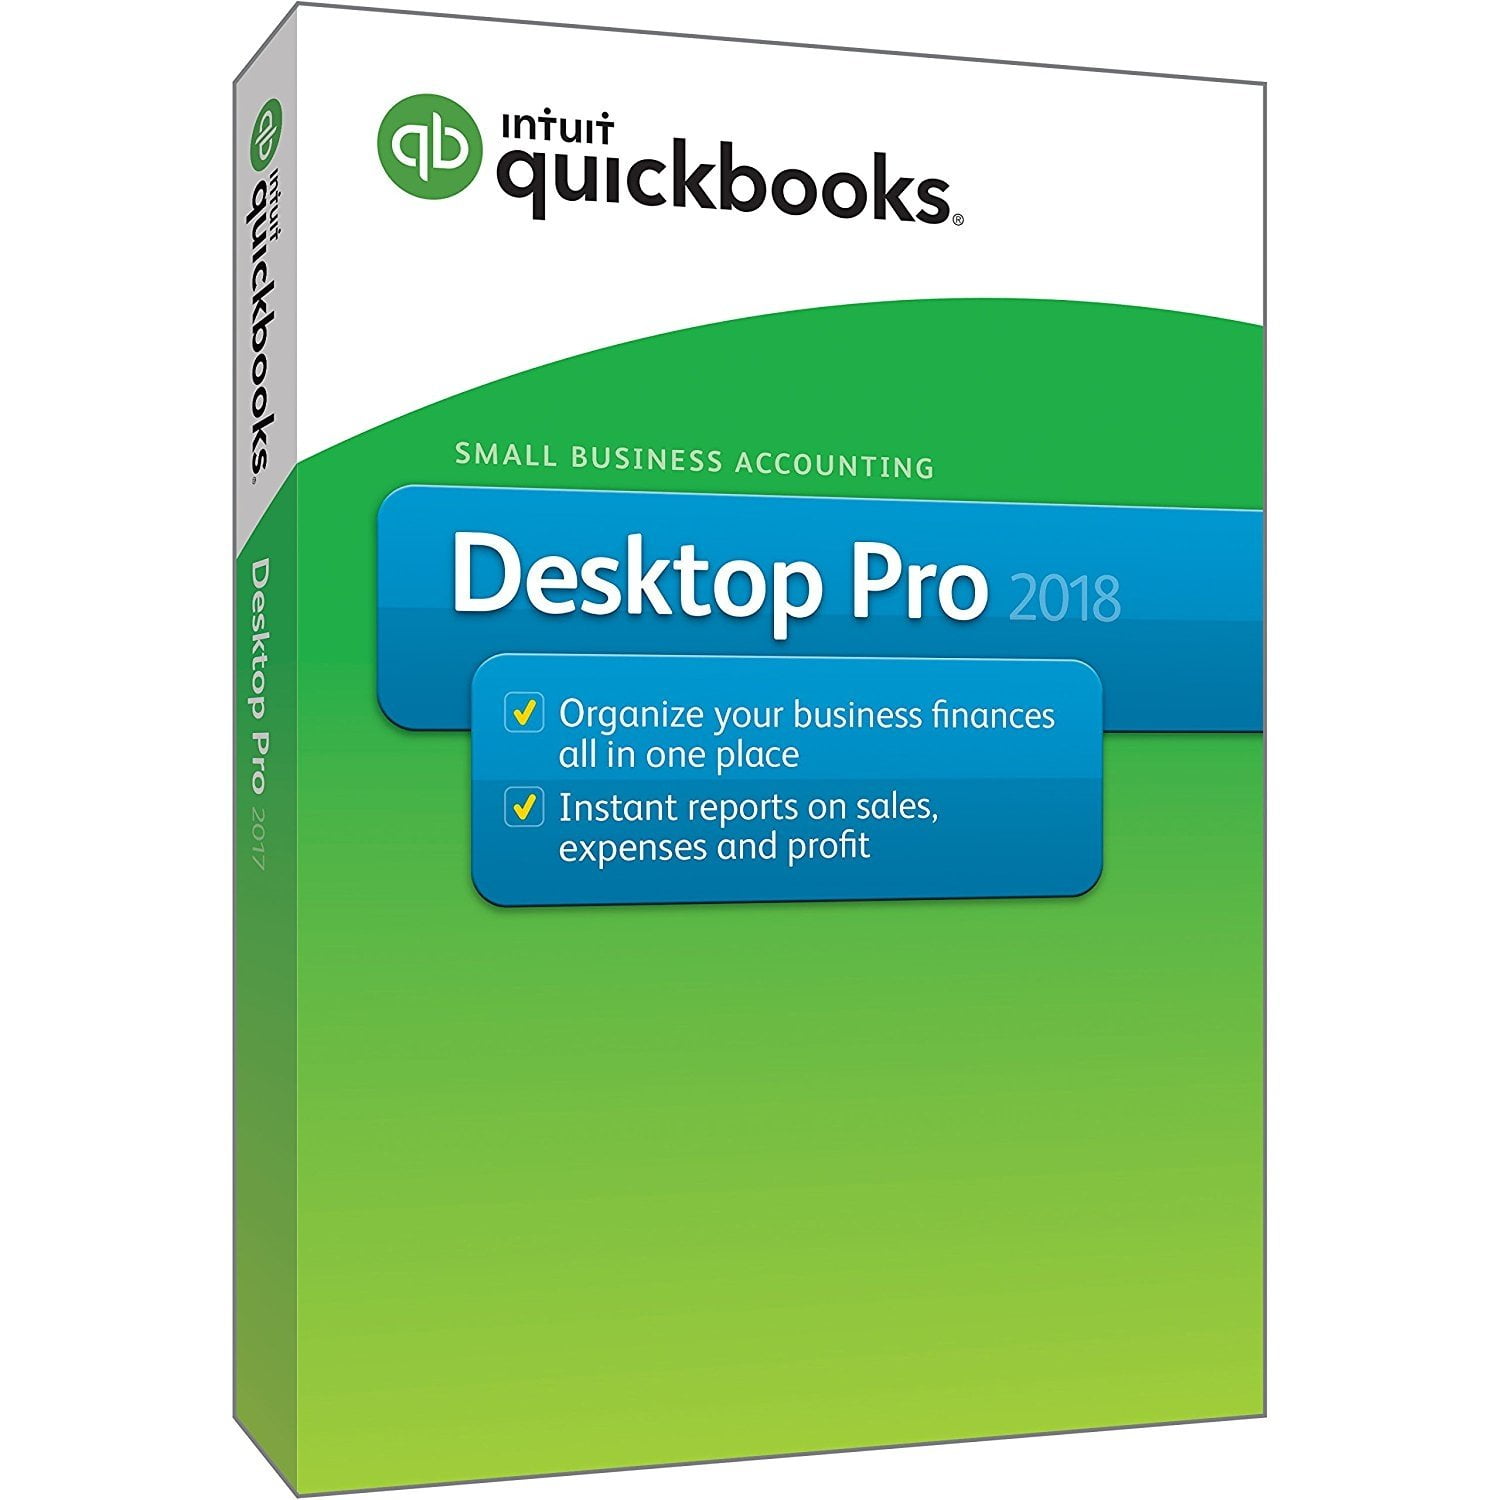 Intuit QuickBooks Desktop Pro 2018 Small Business Accounting Software